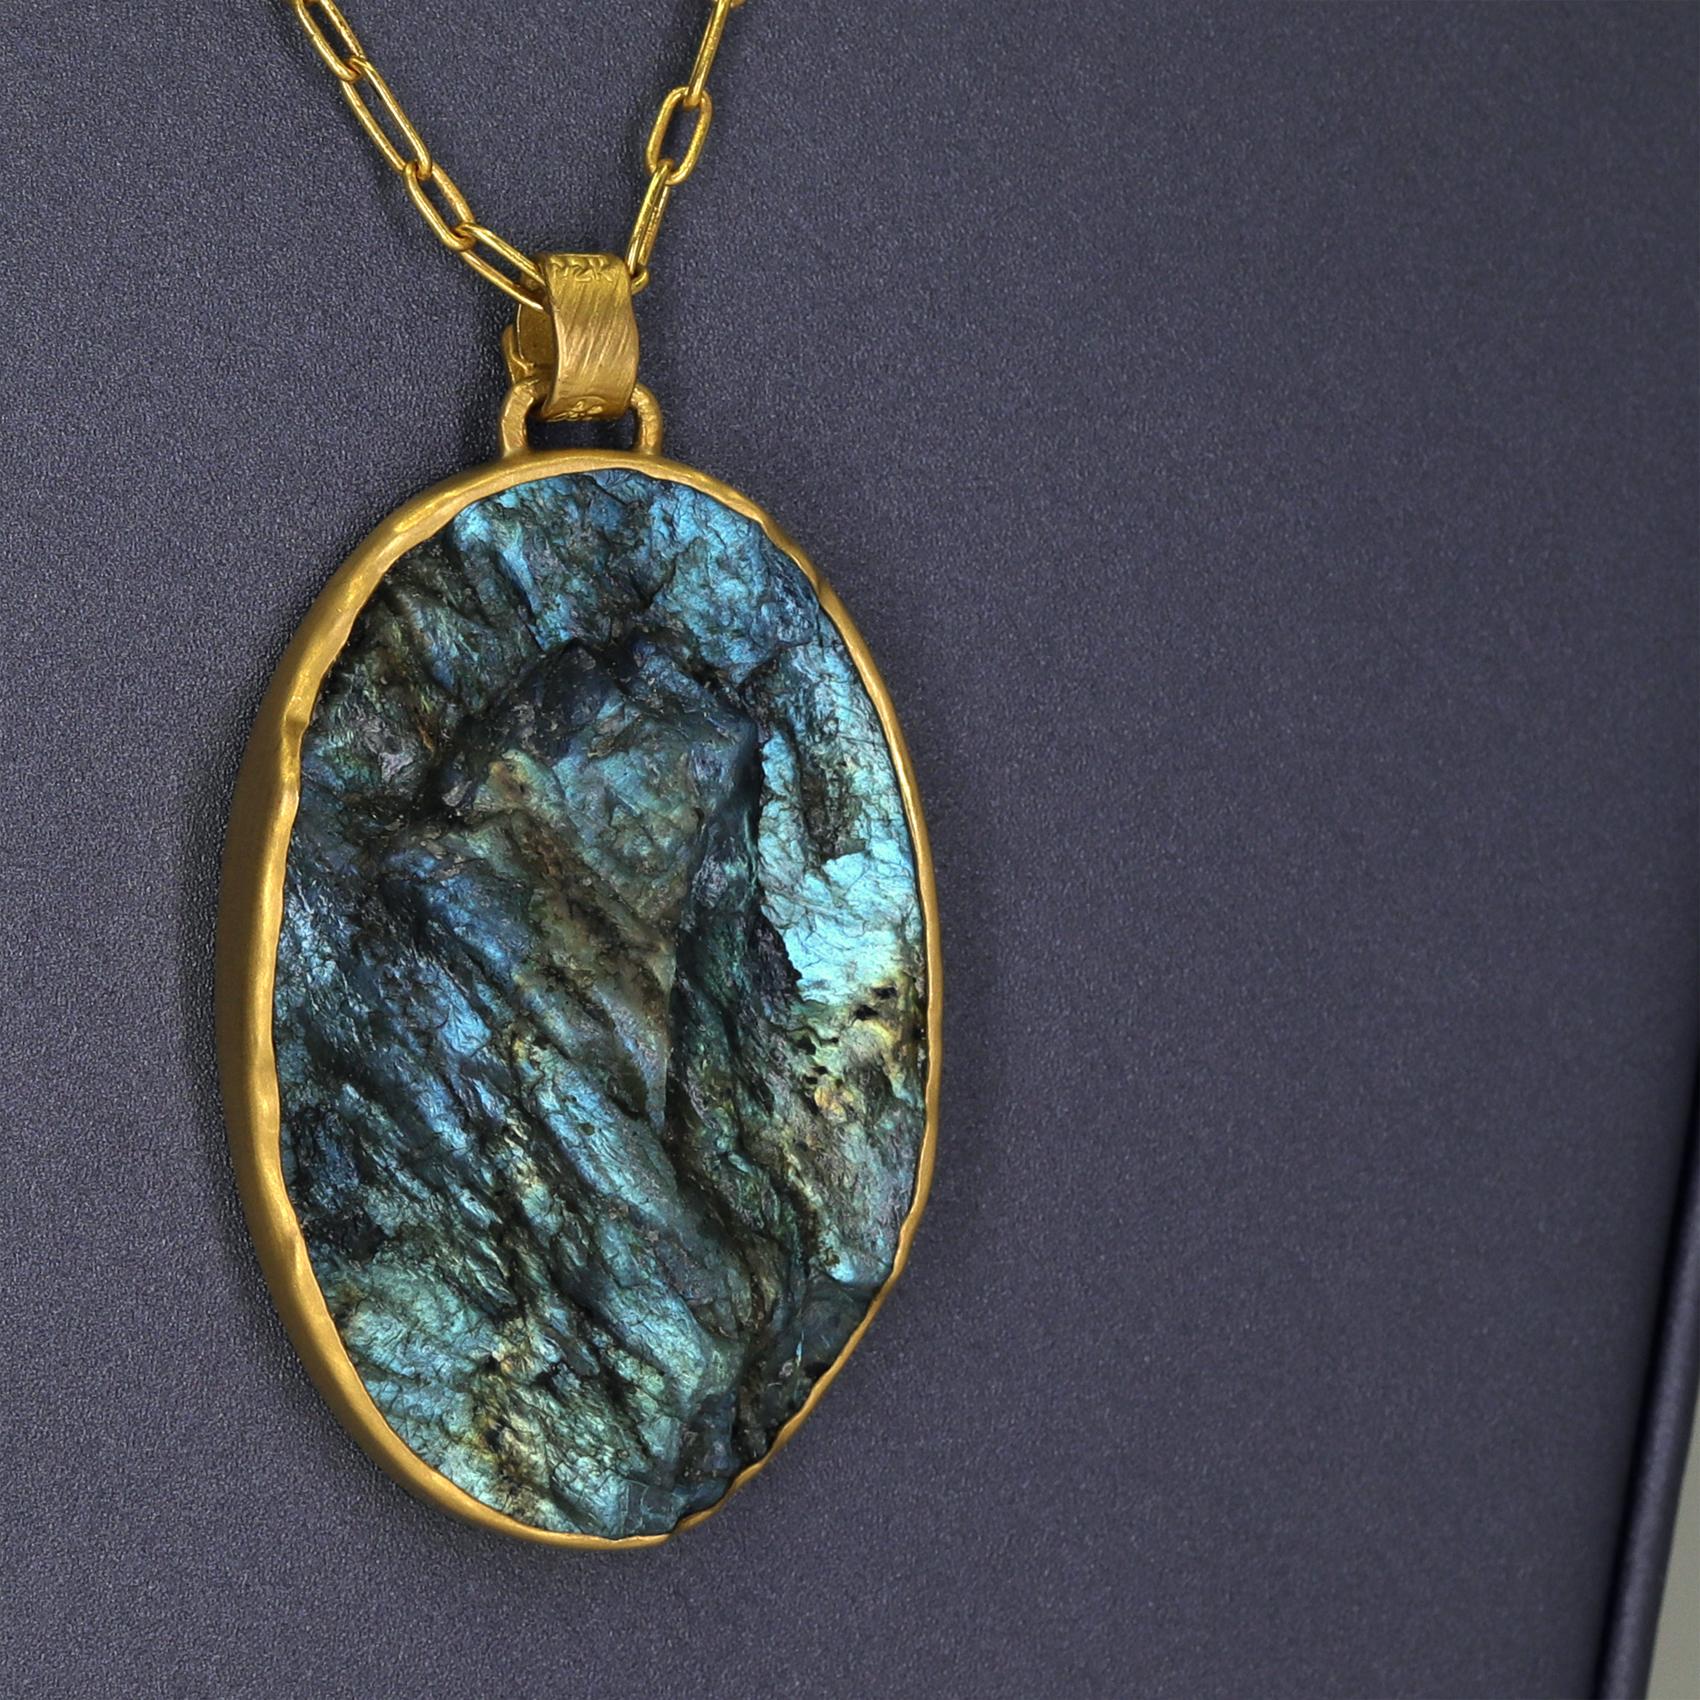 One of a Kind Brutalist Necklace by jewelry maker Lola Brooks showcasing a magnificent 94.6 carat chiseled labradorite oval with stunning labradorescence, hand-fabricated in the artist's signature-finished 22k yellow gold bezel and finished on a